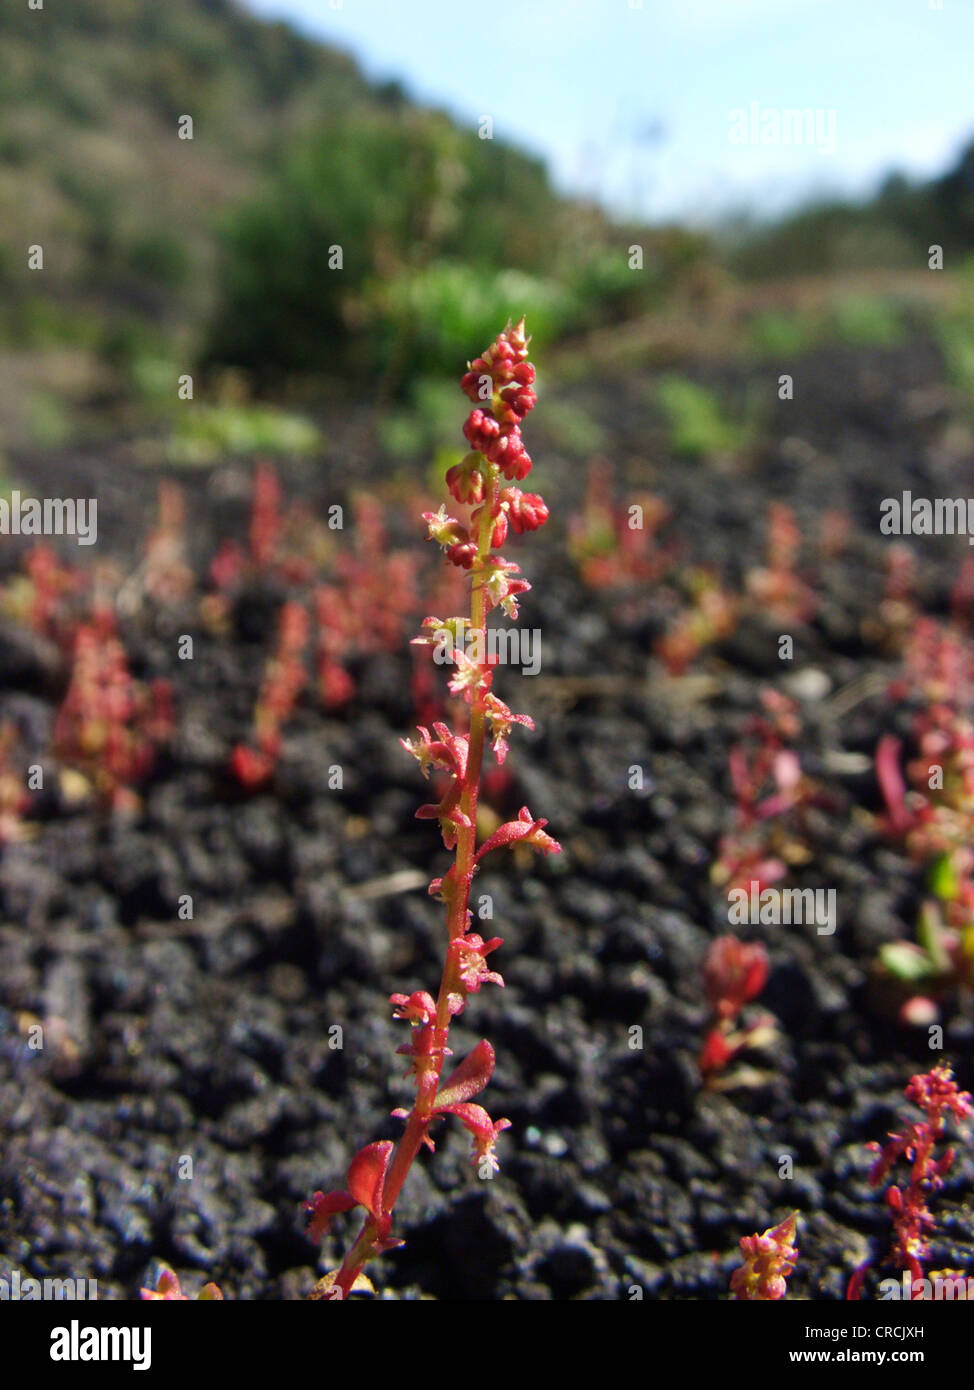 Red Dock (Rumex bucephalophorus), single plant growing on lava at the southern slope of Mount Etna, Italy, Sicilia Stock Photo